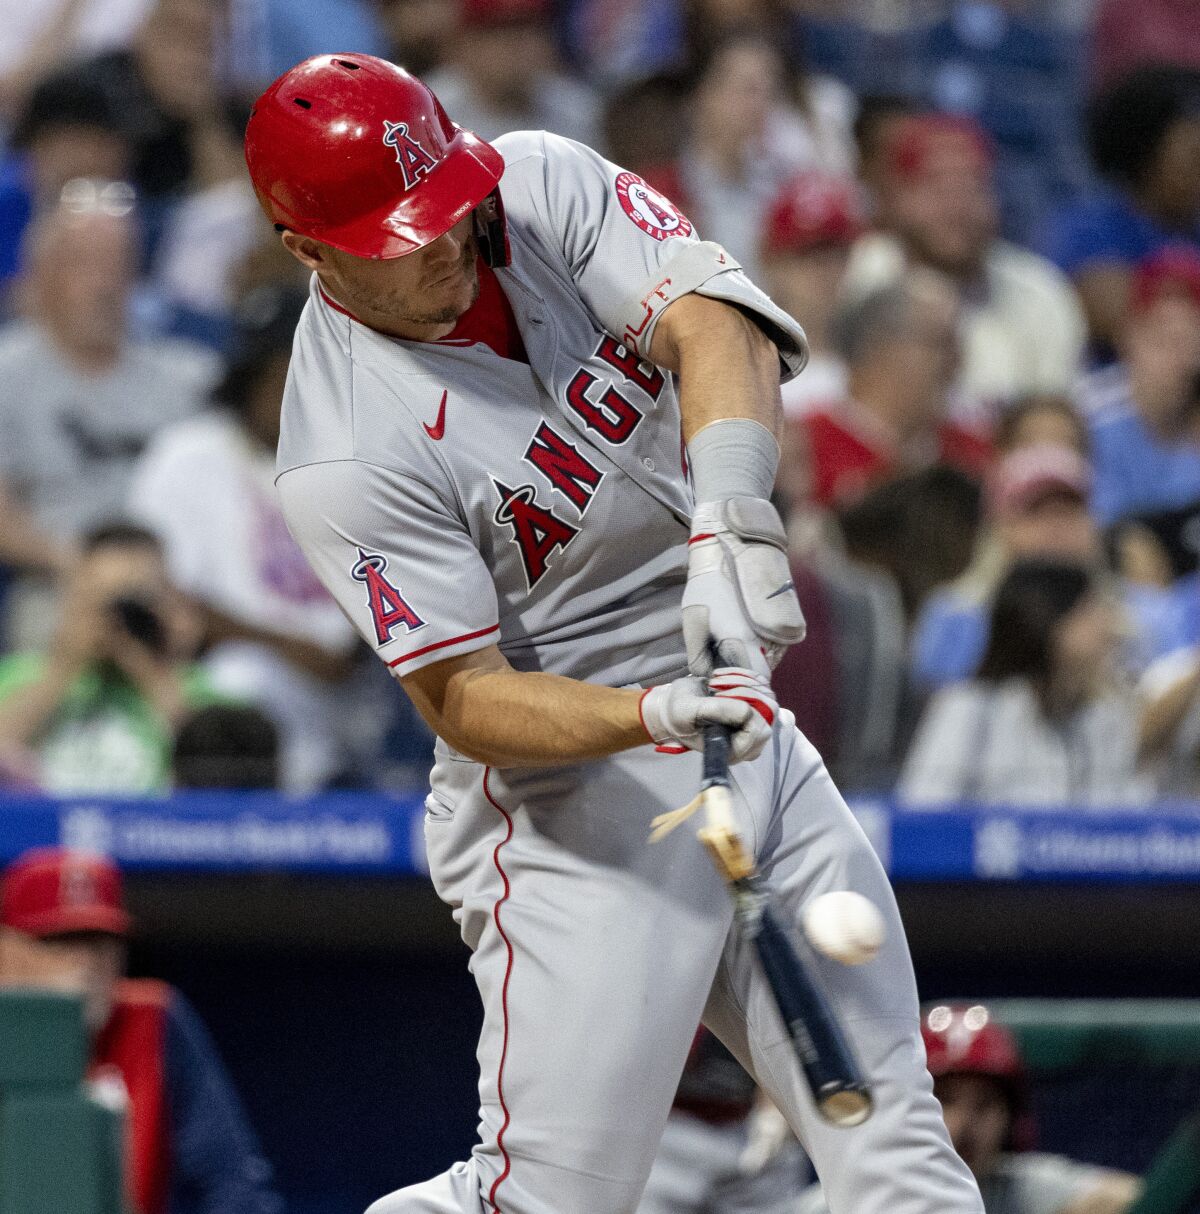 Mike Trout breaks his bat while grounding into a fielder's choice out in the third inning of the Angels' loss June 4, 2022.